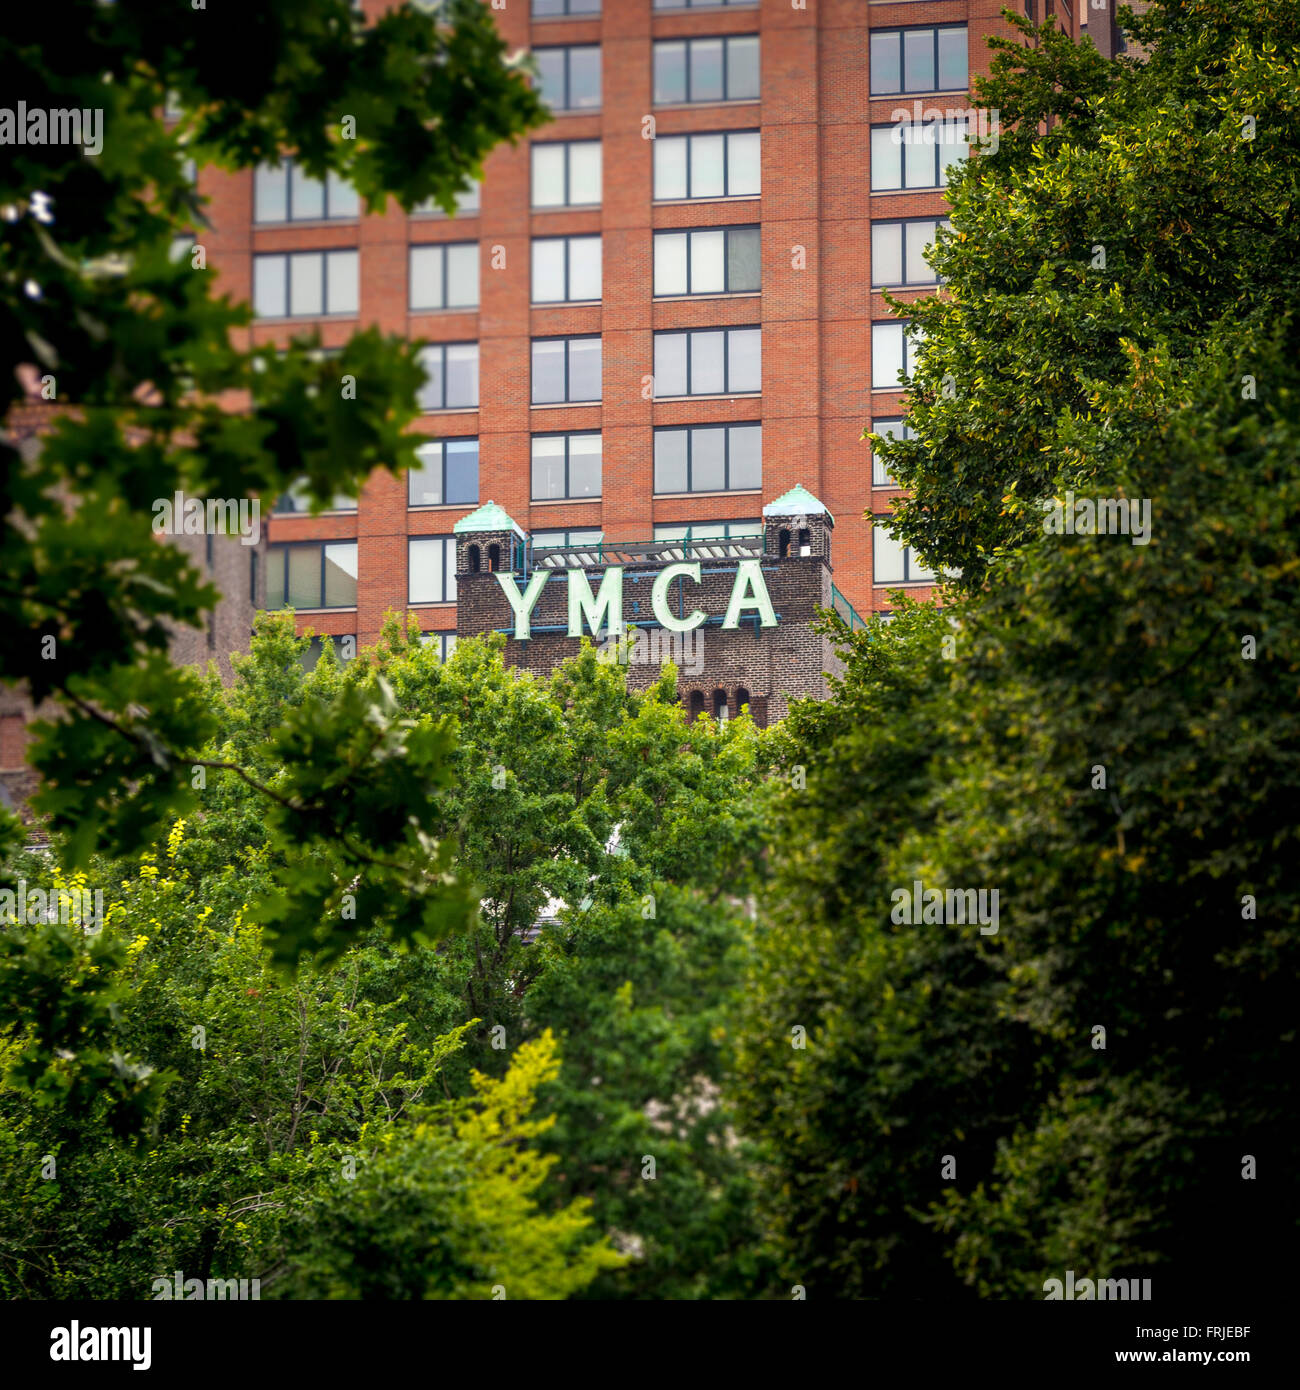 West side YMCA building seen through trees in Central Park, New York City, USA. Stock Photo